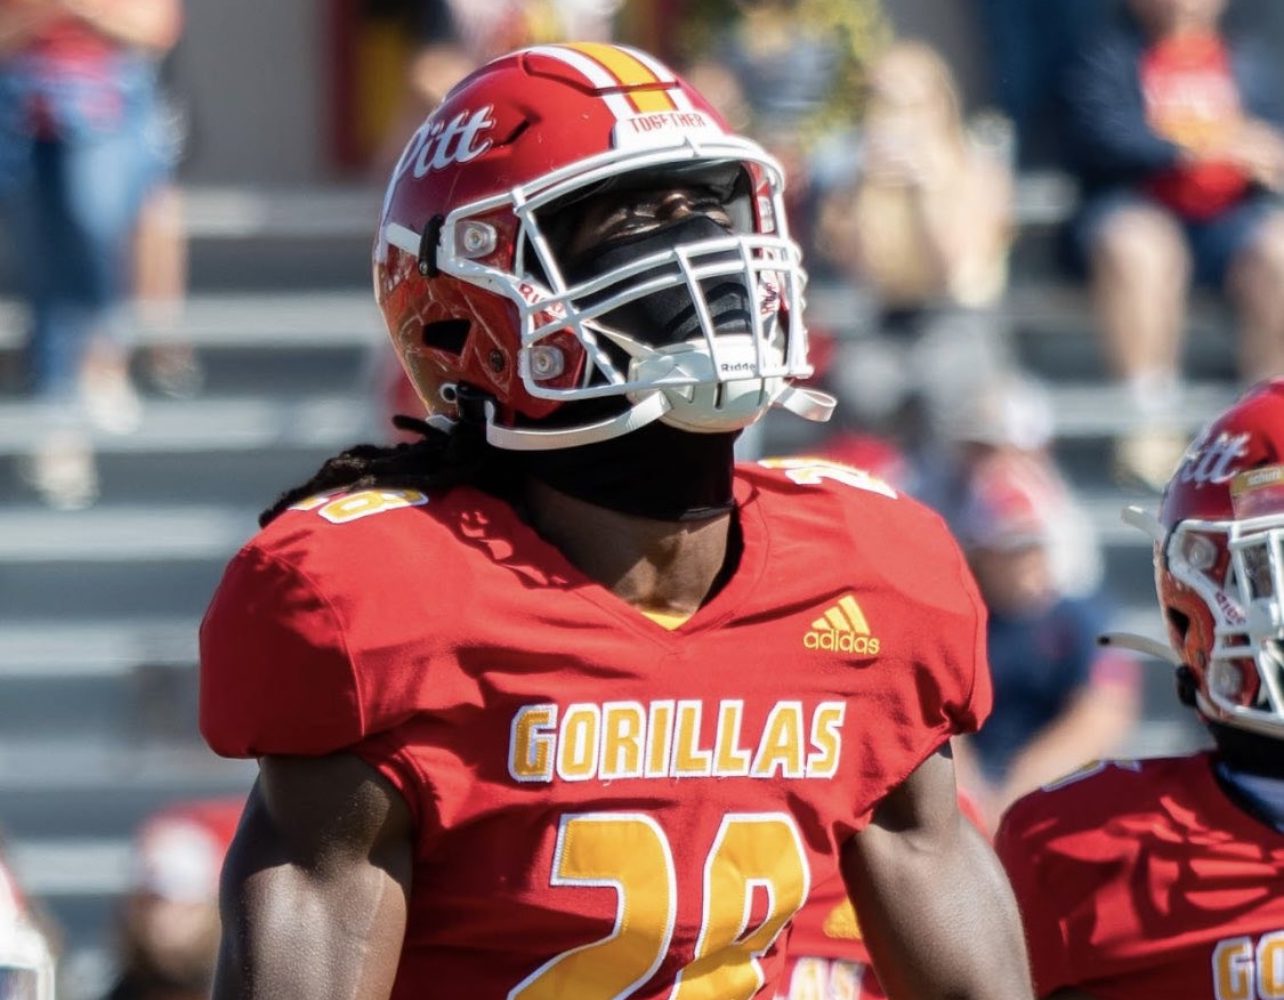 Ty Nichols the star defensive back from Pittsburg State University recently sat down with NFL Draft Diamonds writer Justin Berendzen